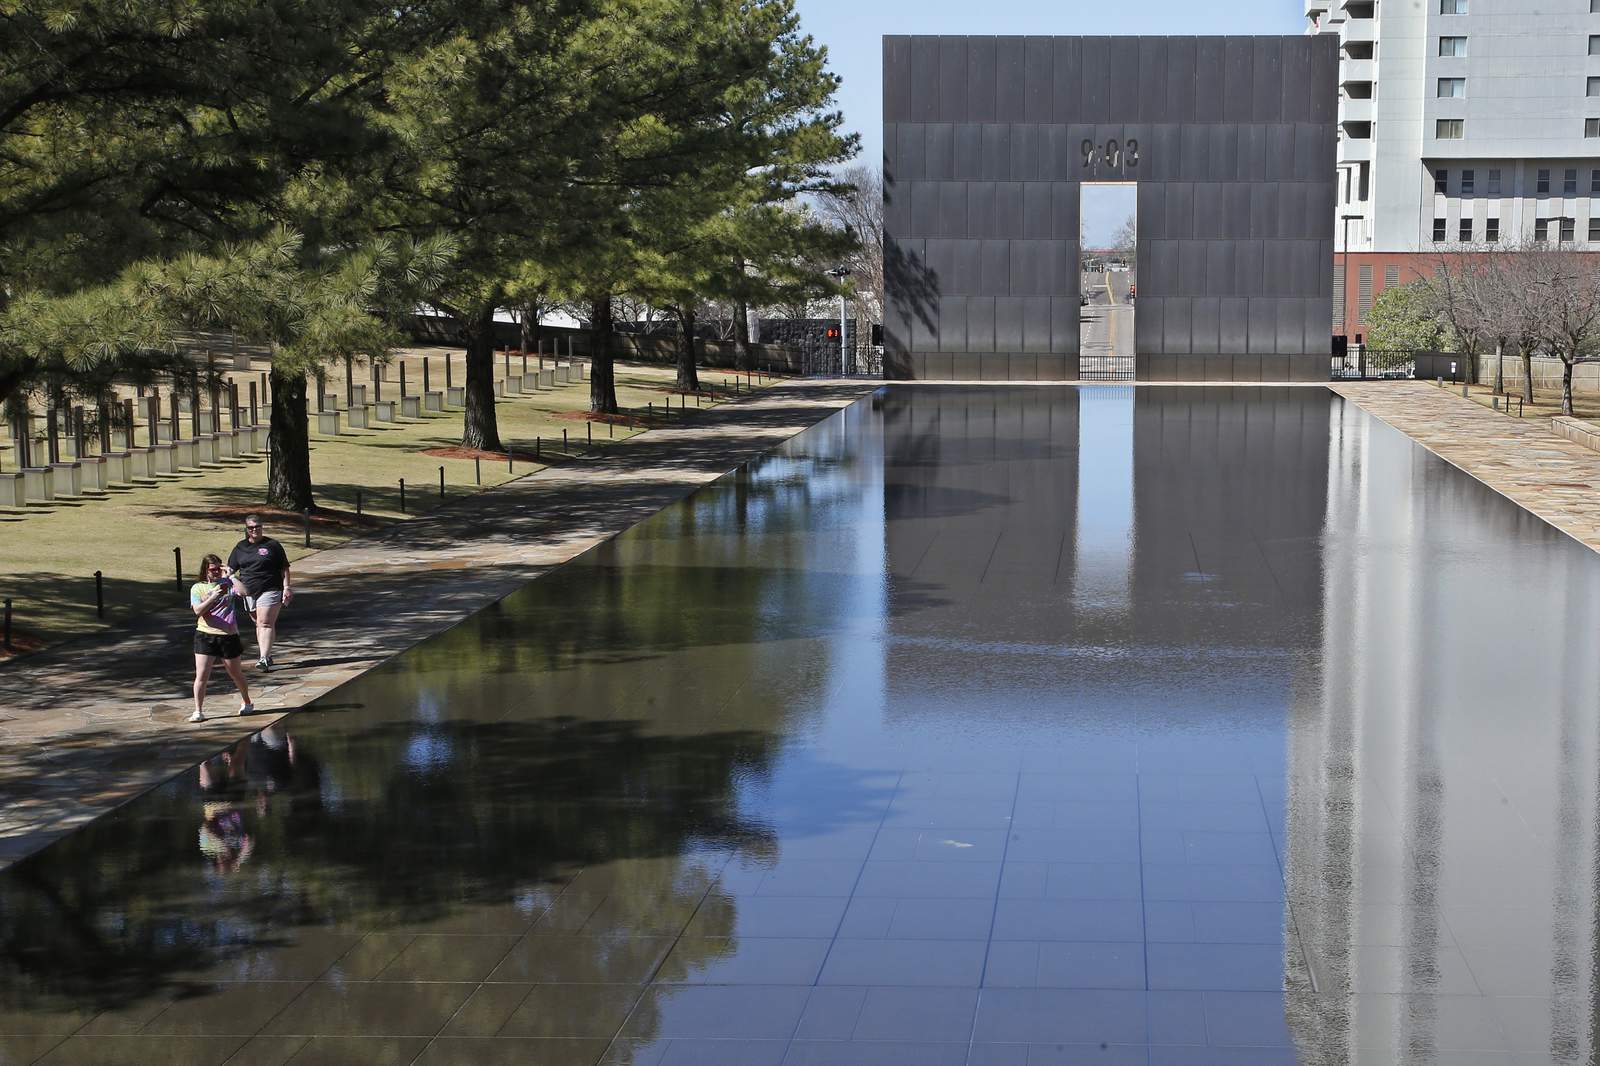 25 years after Oklahoma City bombing, anxiety remains high